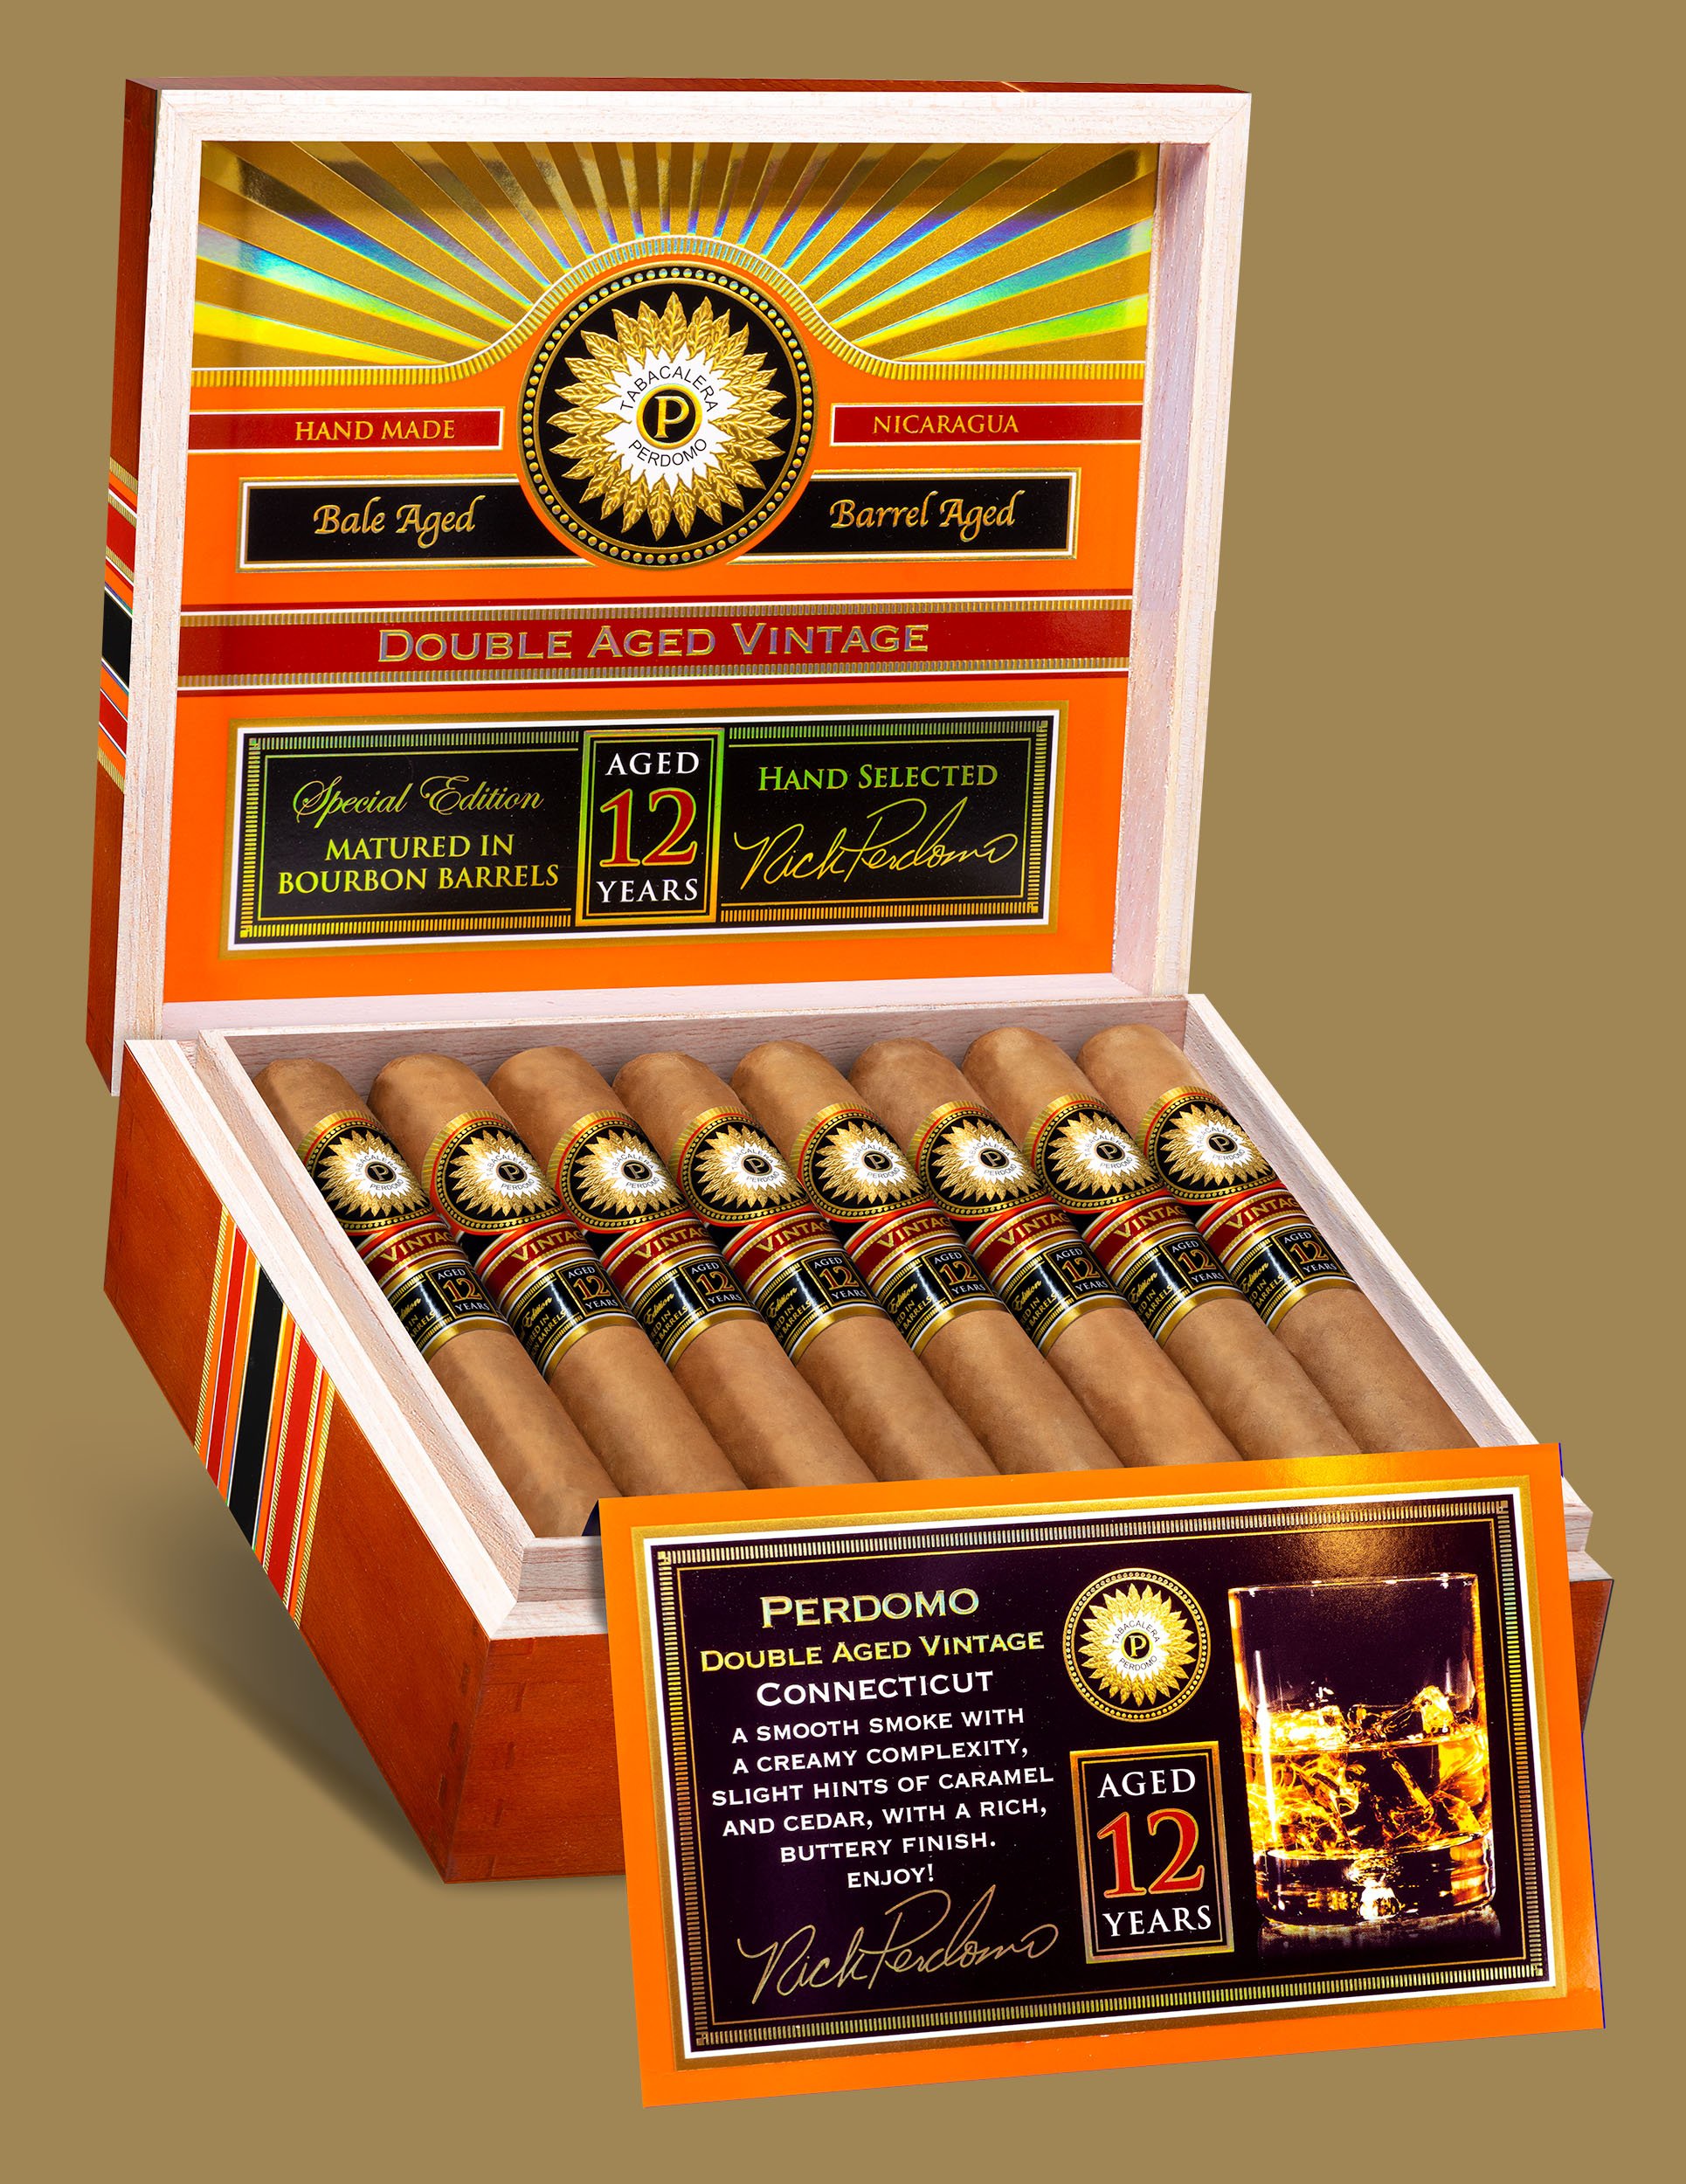 Perdomo Double Aged 12 Year Connecticut